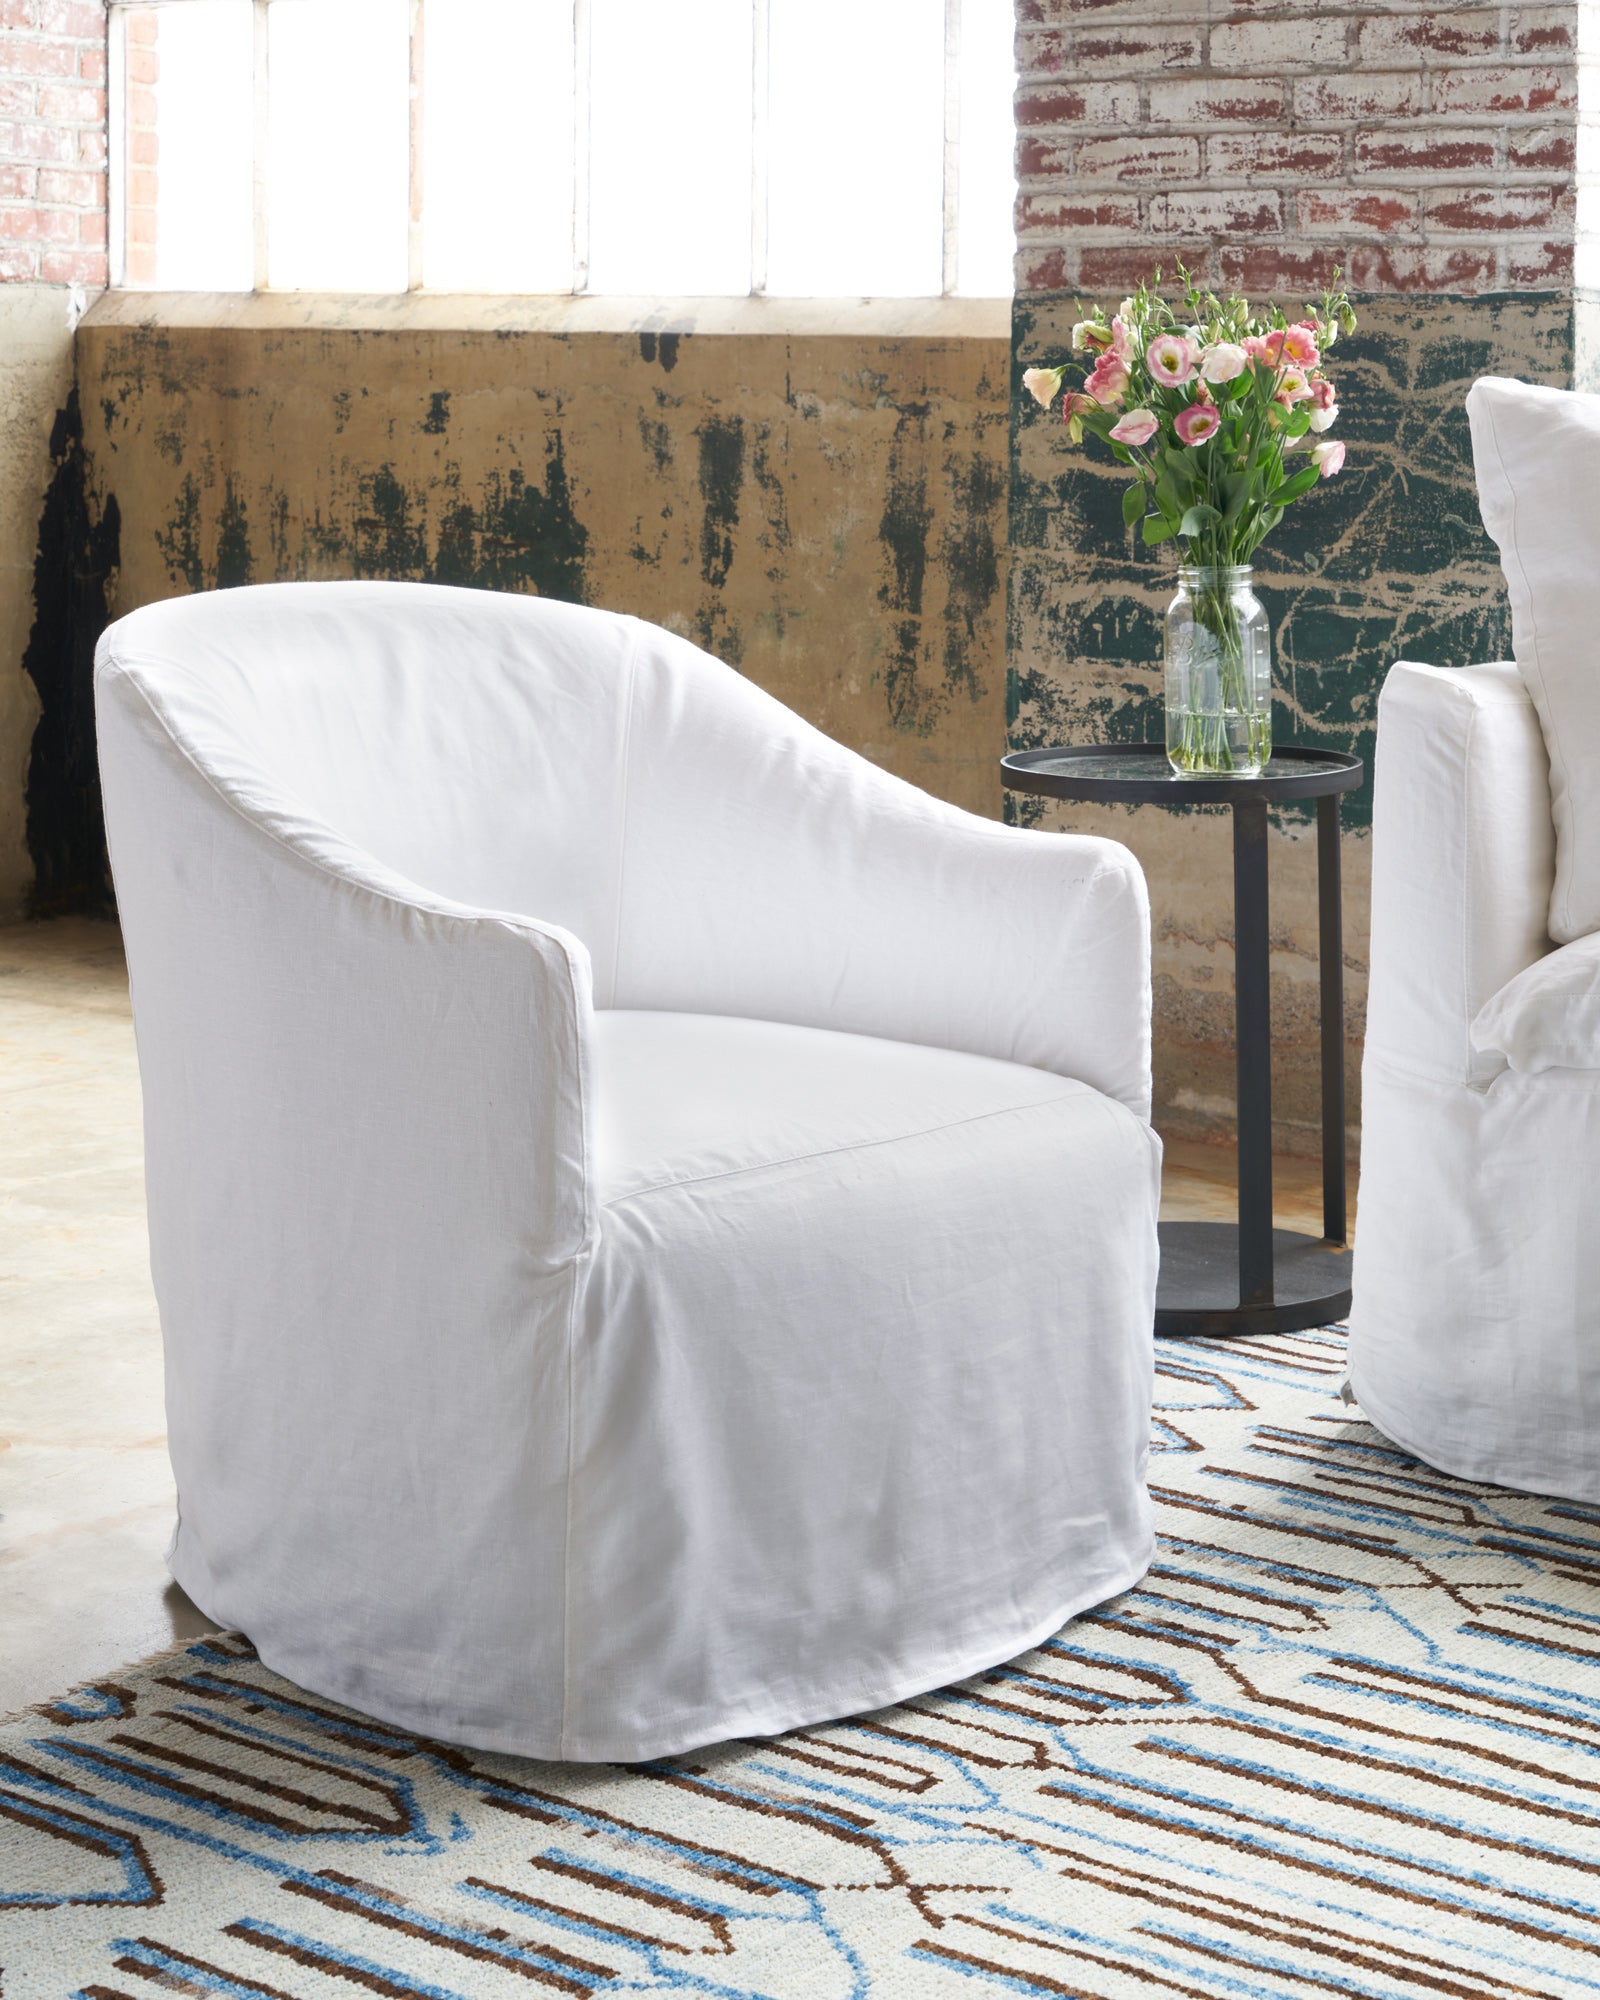  Cali Chair in Otis White next to a side table. Photographed in Otis White. 